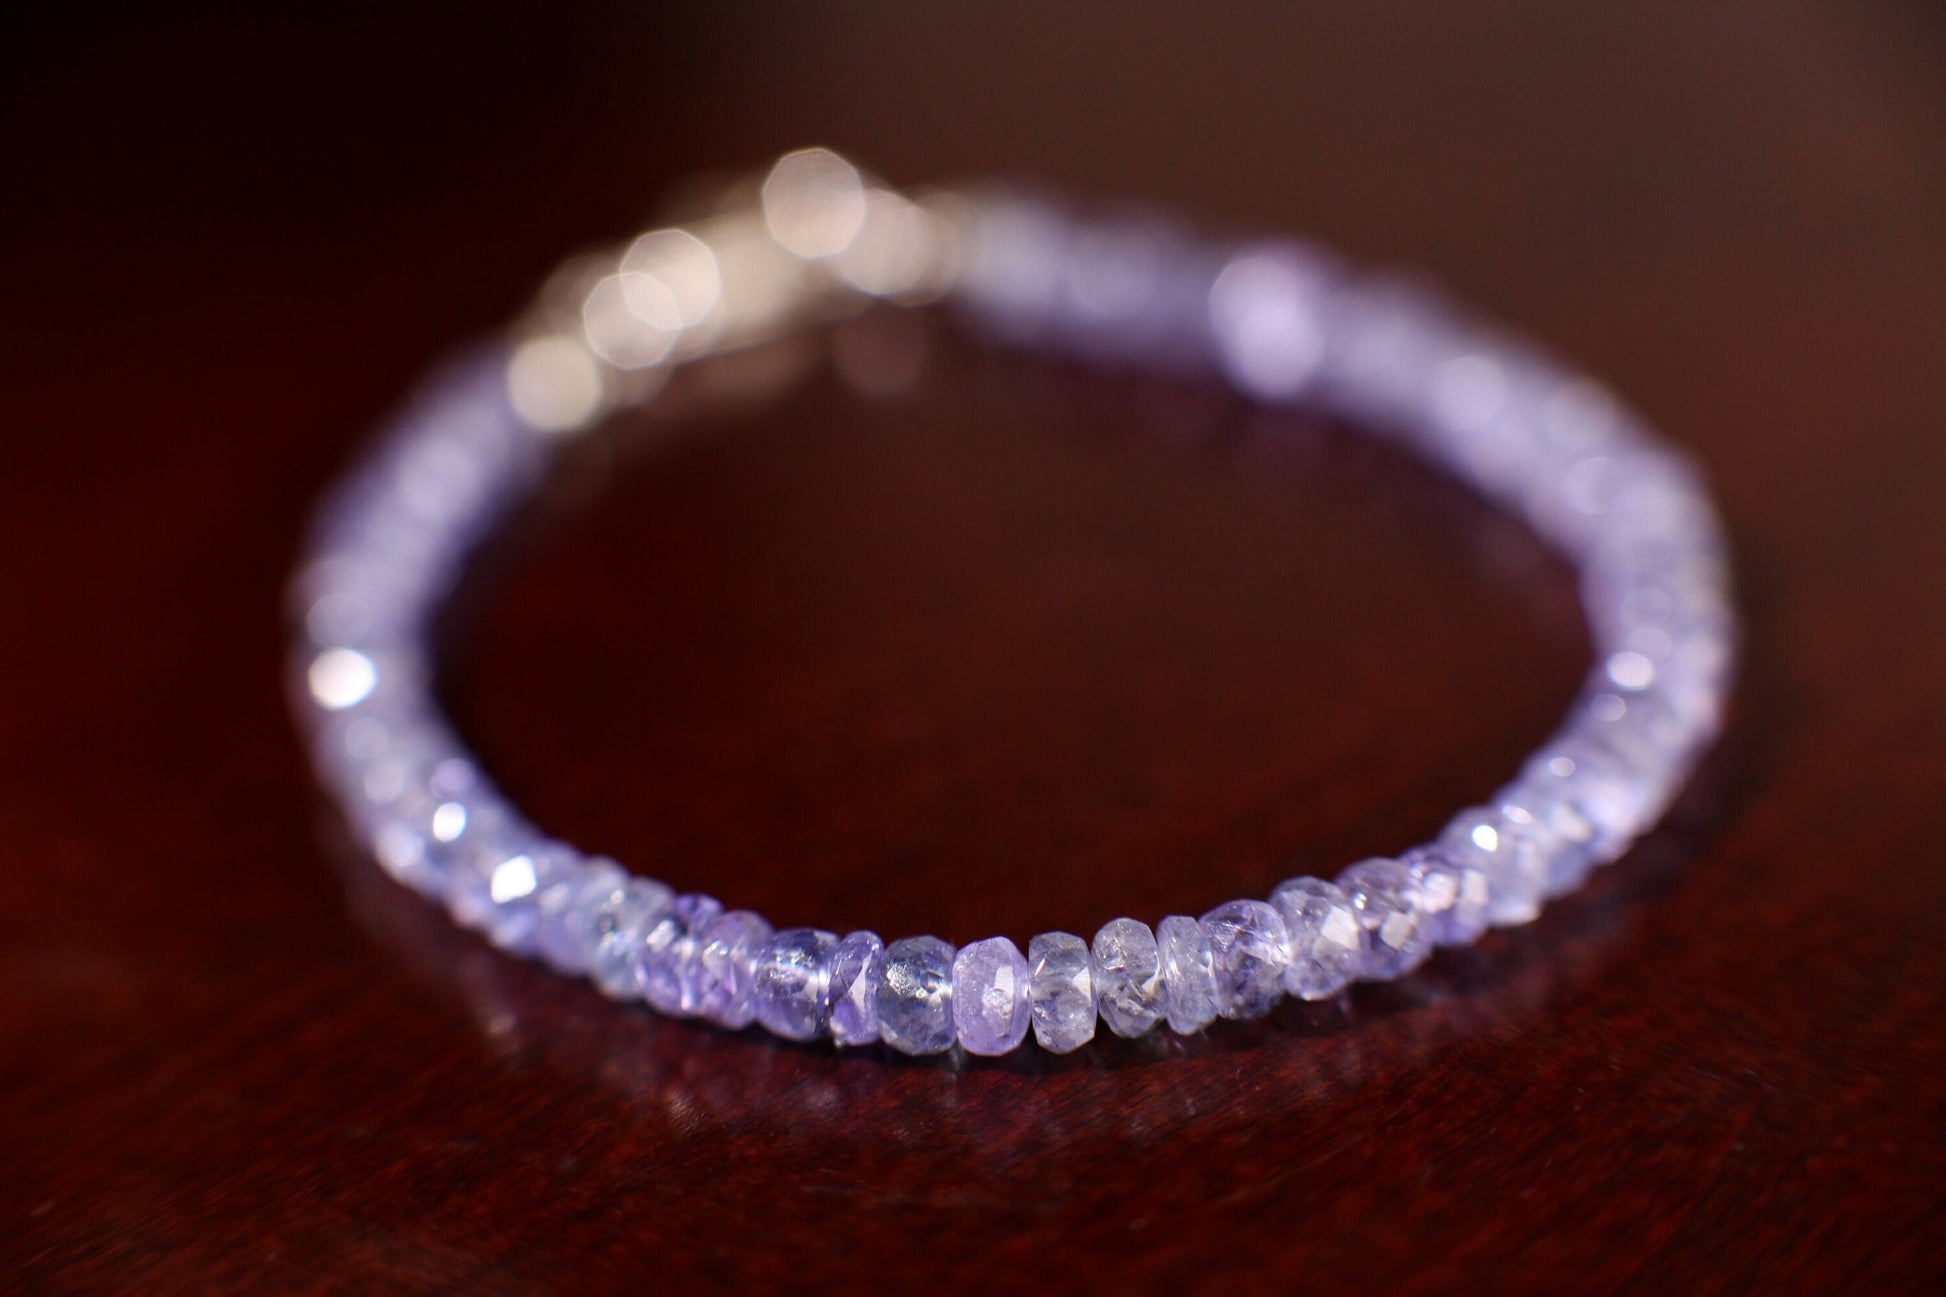 Tanzanite Faceted 4mm Rondelle Gemstone Bracelet in 925 Sterling Silver or 14K Gold Filled Clasp, Precious Gift for her